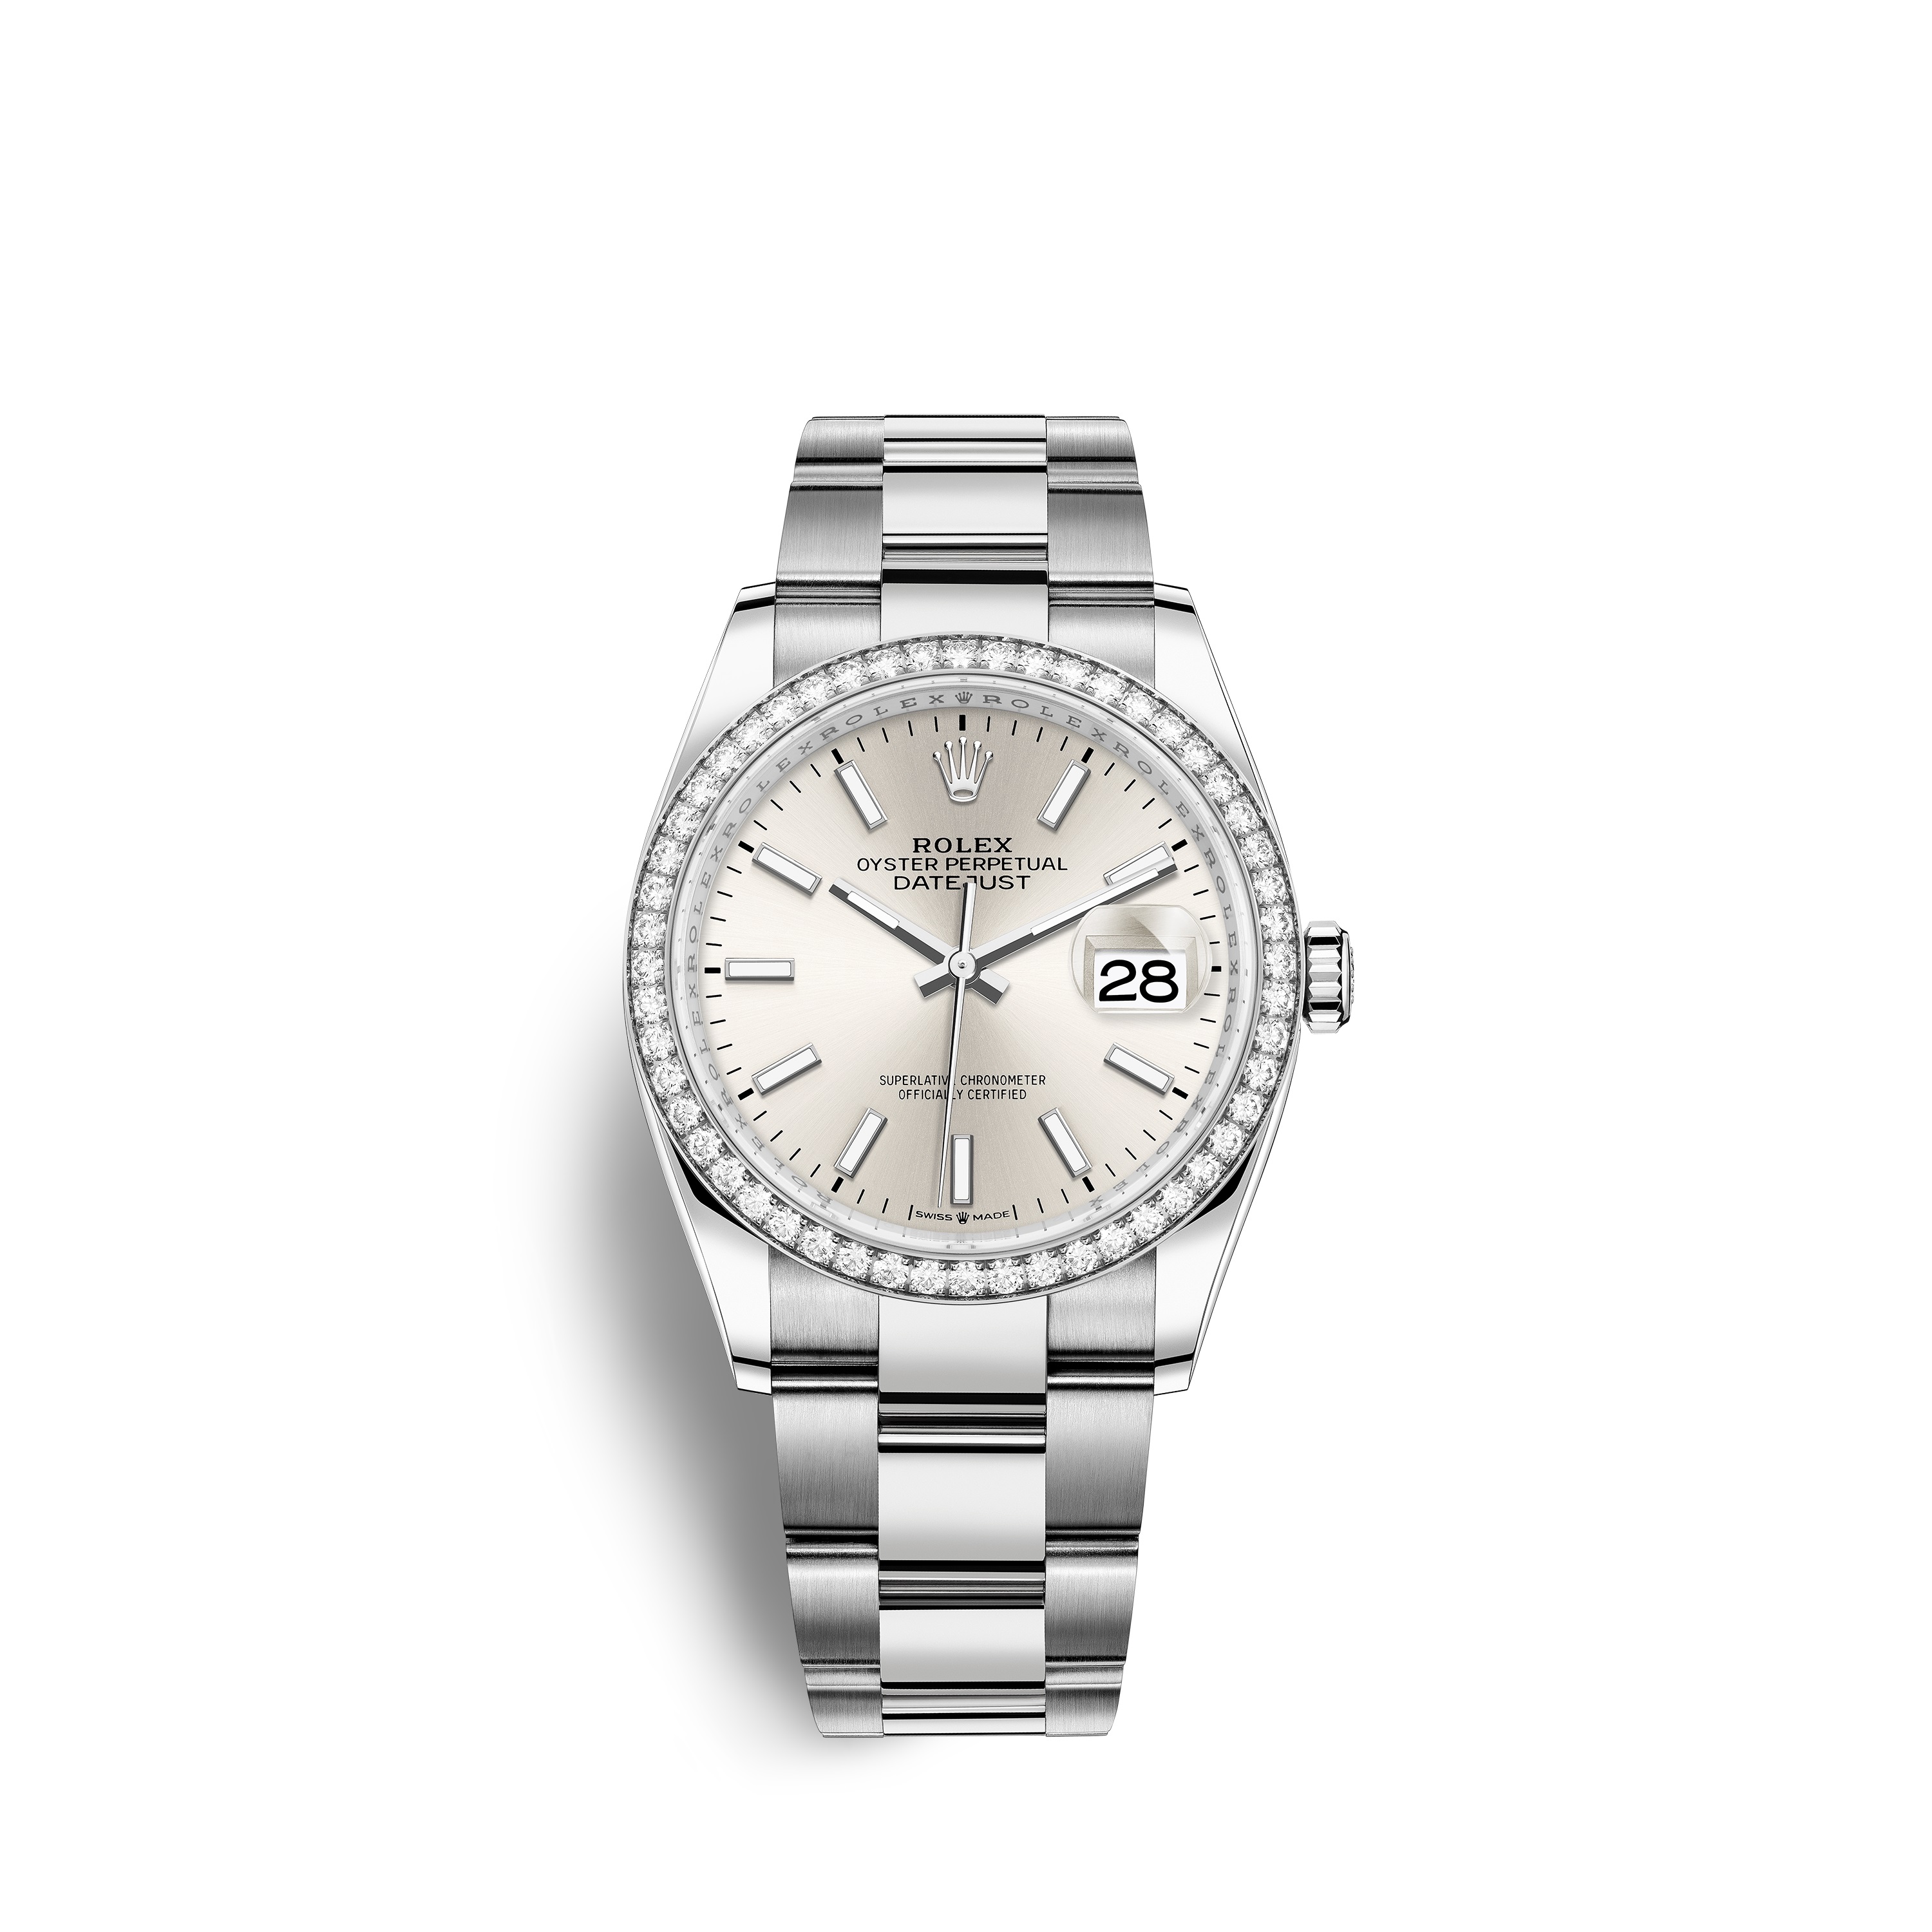 Datejust 36 126284RBR White Gold, Stainless Steel & Diamonds Watch (Silver)